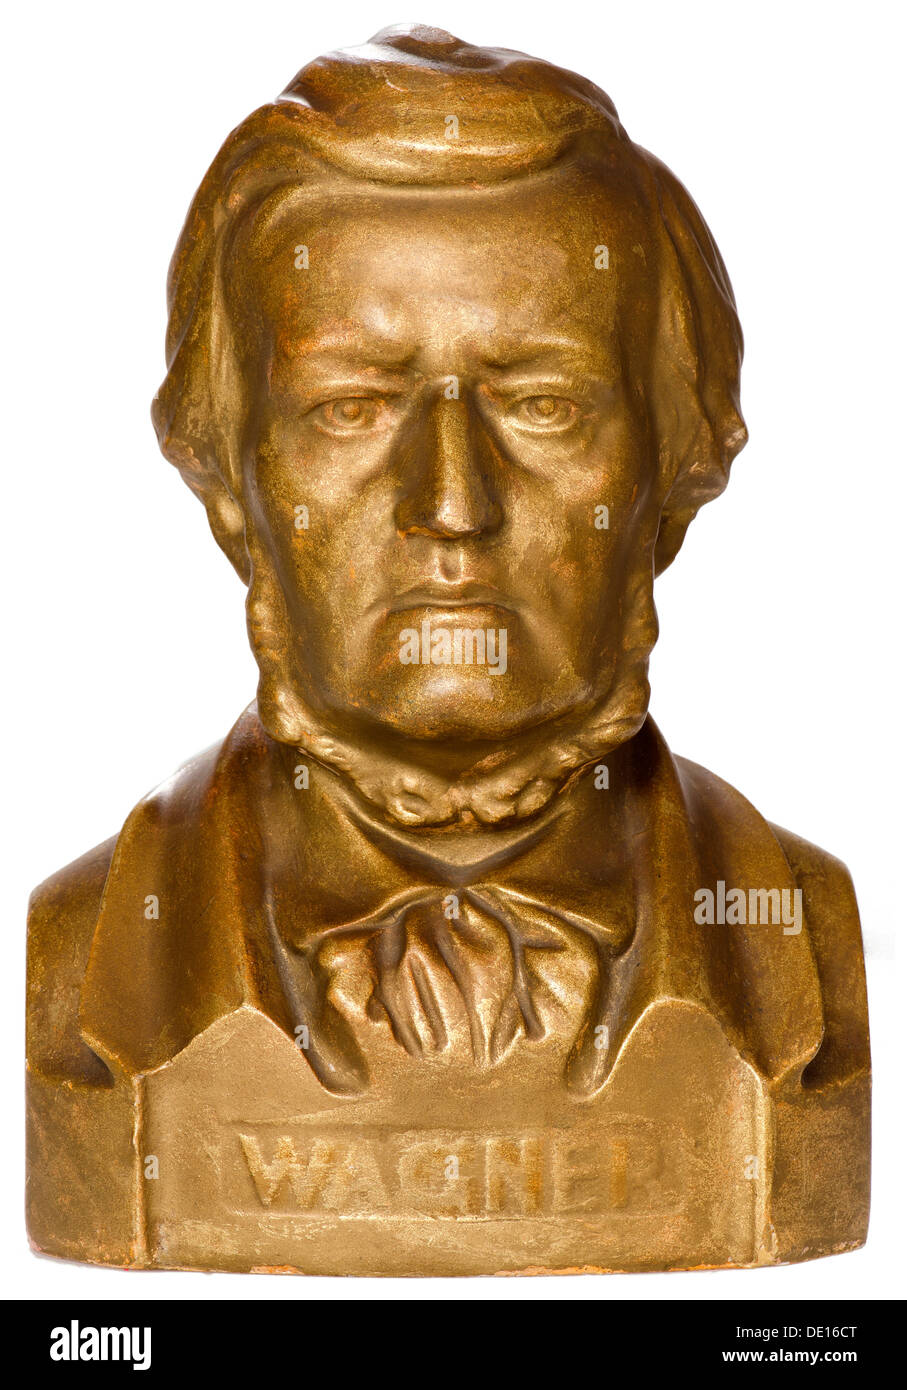 Wagner, Richard, 22.5.1813 - 13.2.1883, German musician (composer), portrait, plaster bust, painted with bronze colour, handwritten dated on the bottom, Germany, 1927, Stock Photo